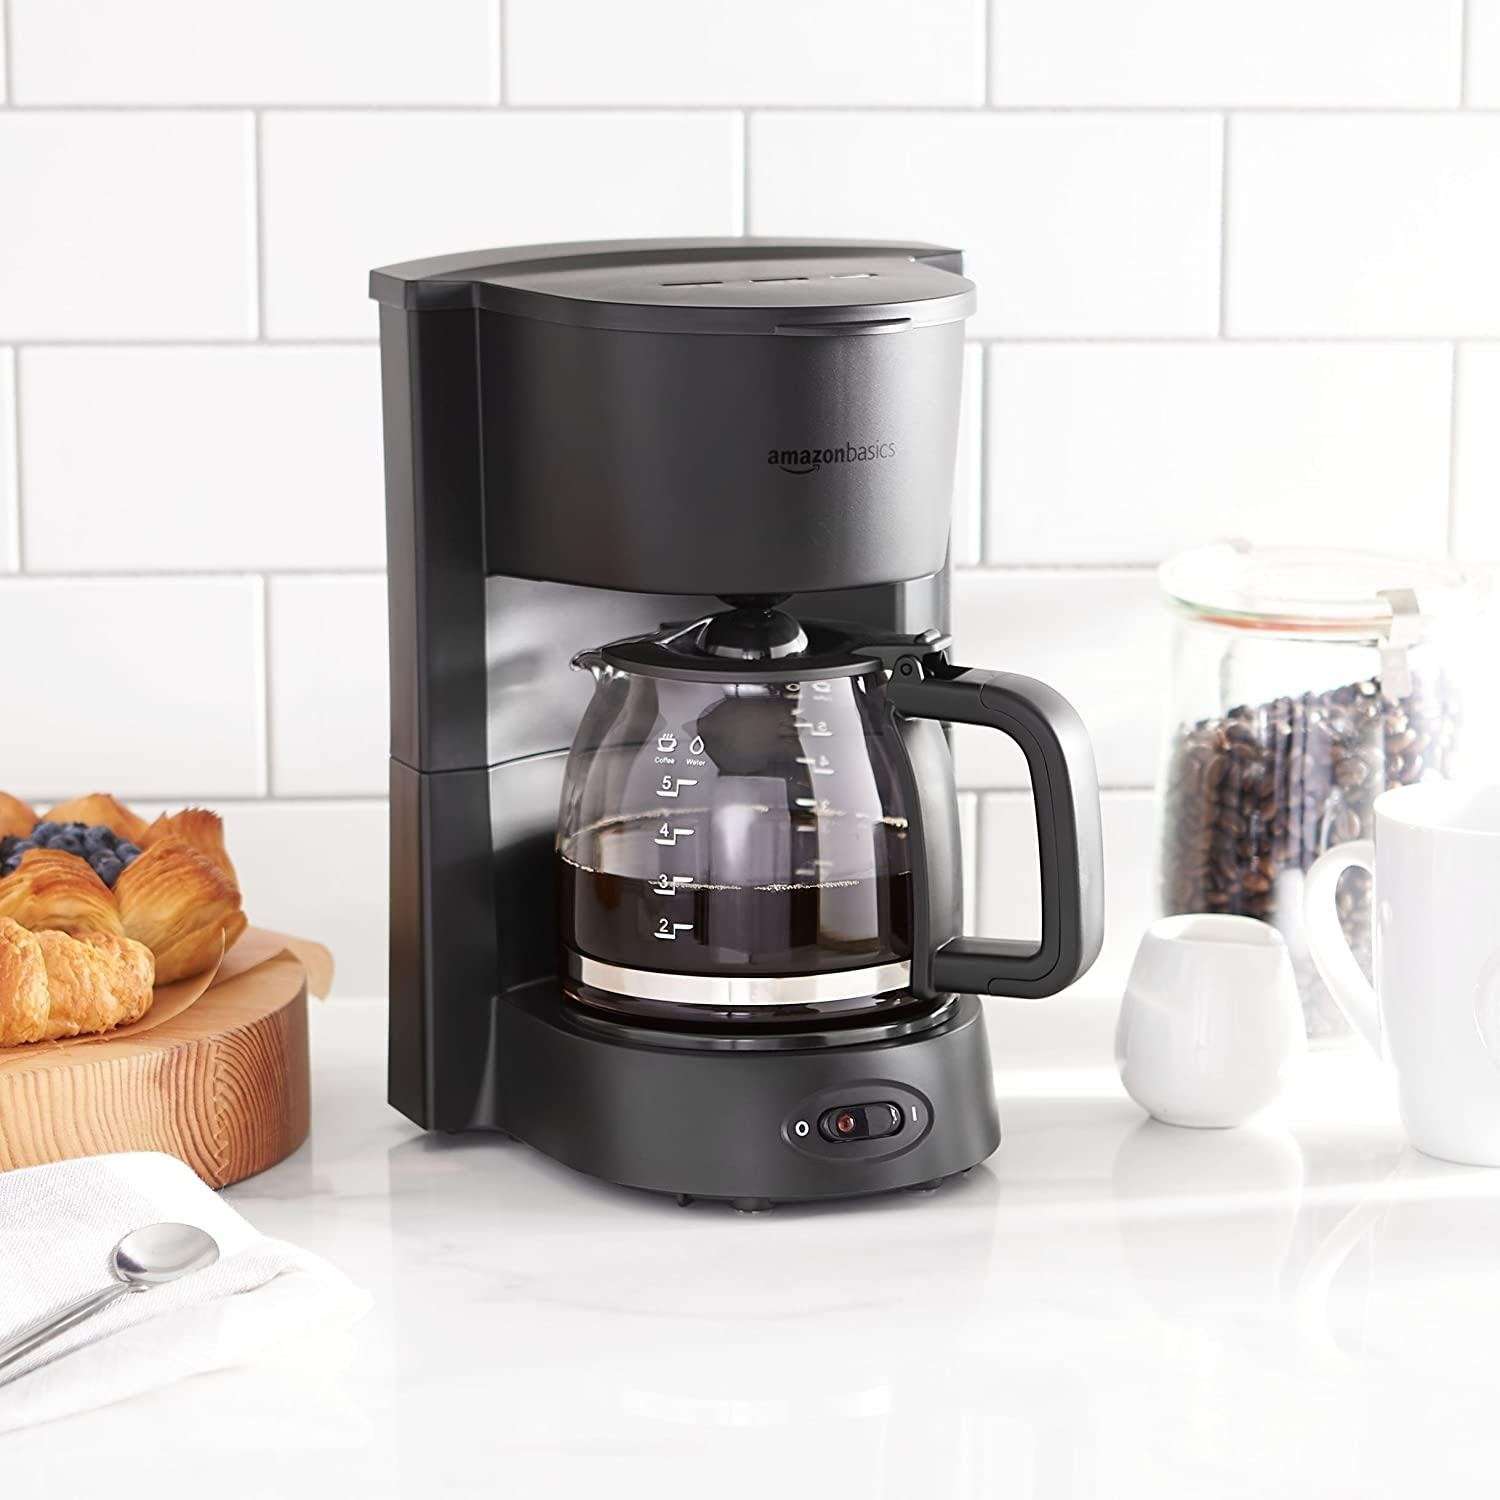 Top 10 Best coffee makers in 2020 in Canada